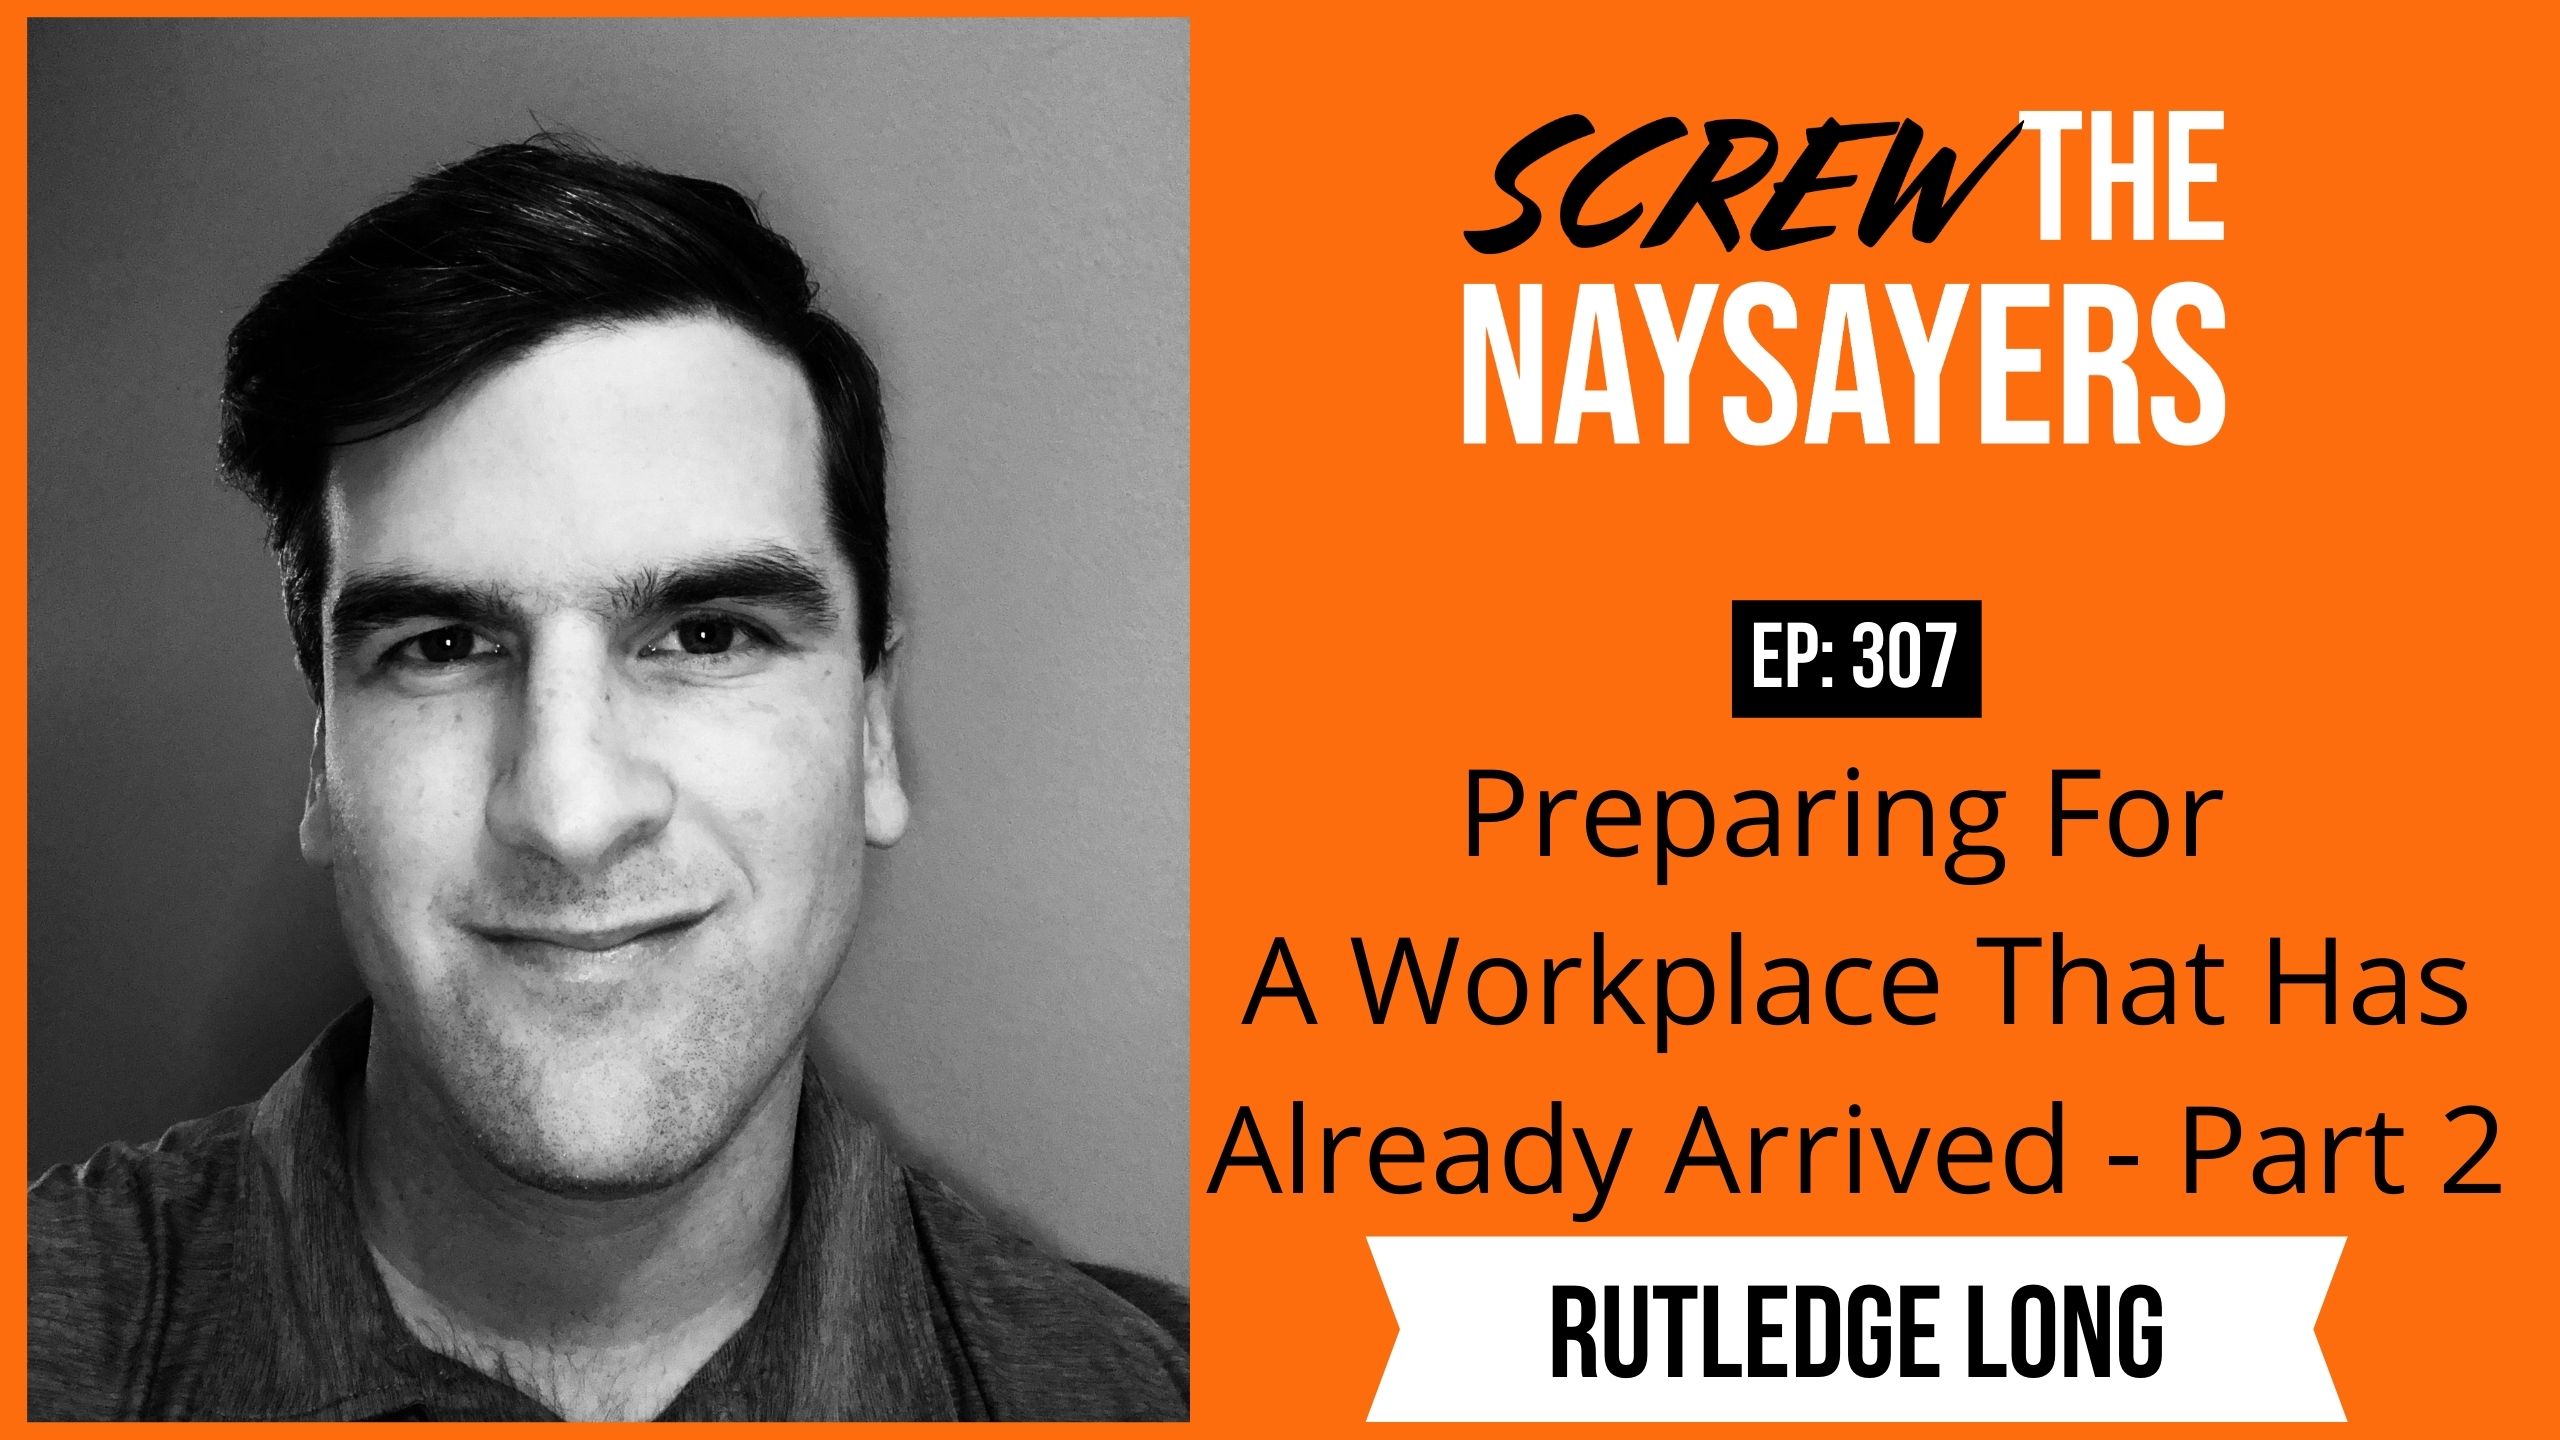 Preparing For A Workplace That Has Already Arrived | Rutledge Long - Part 2